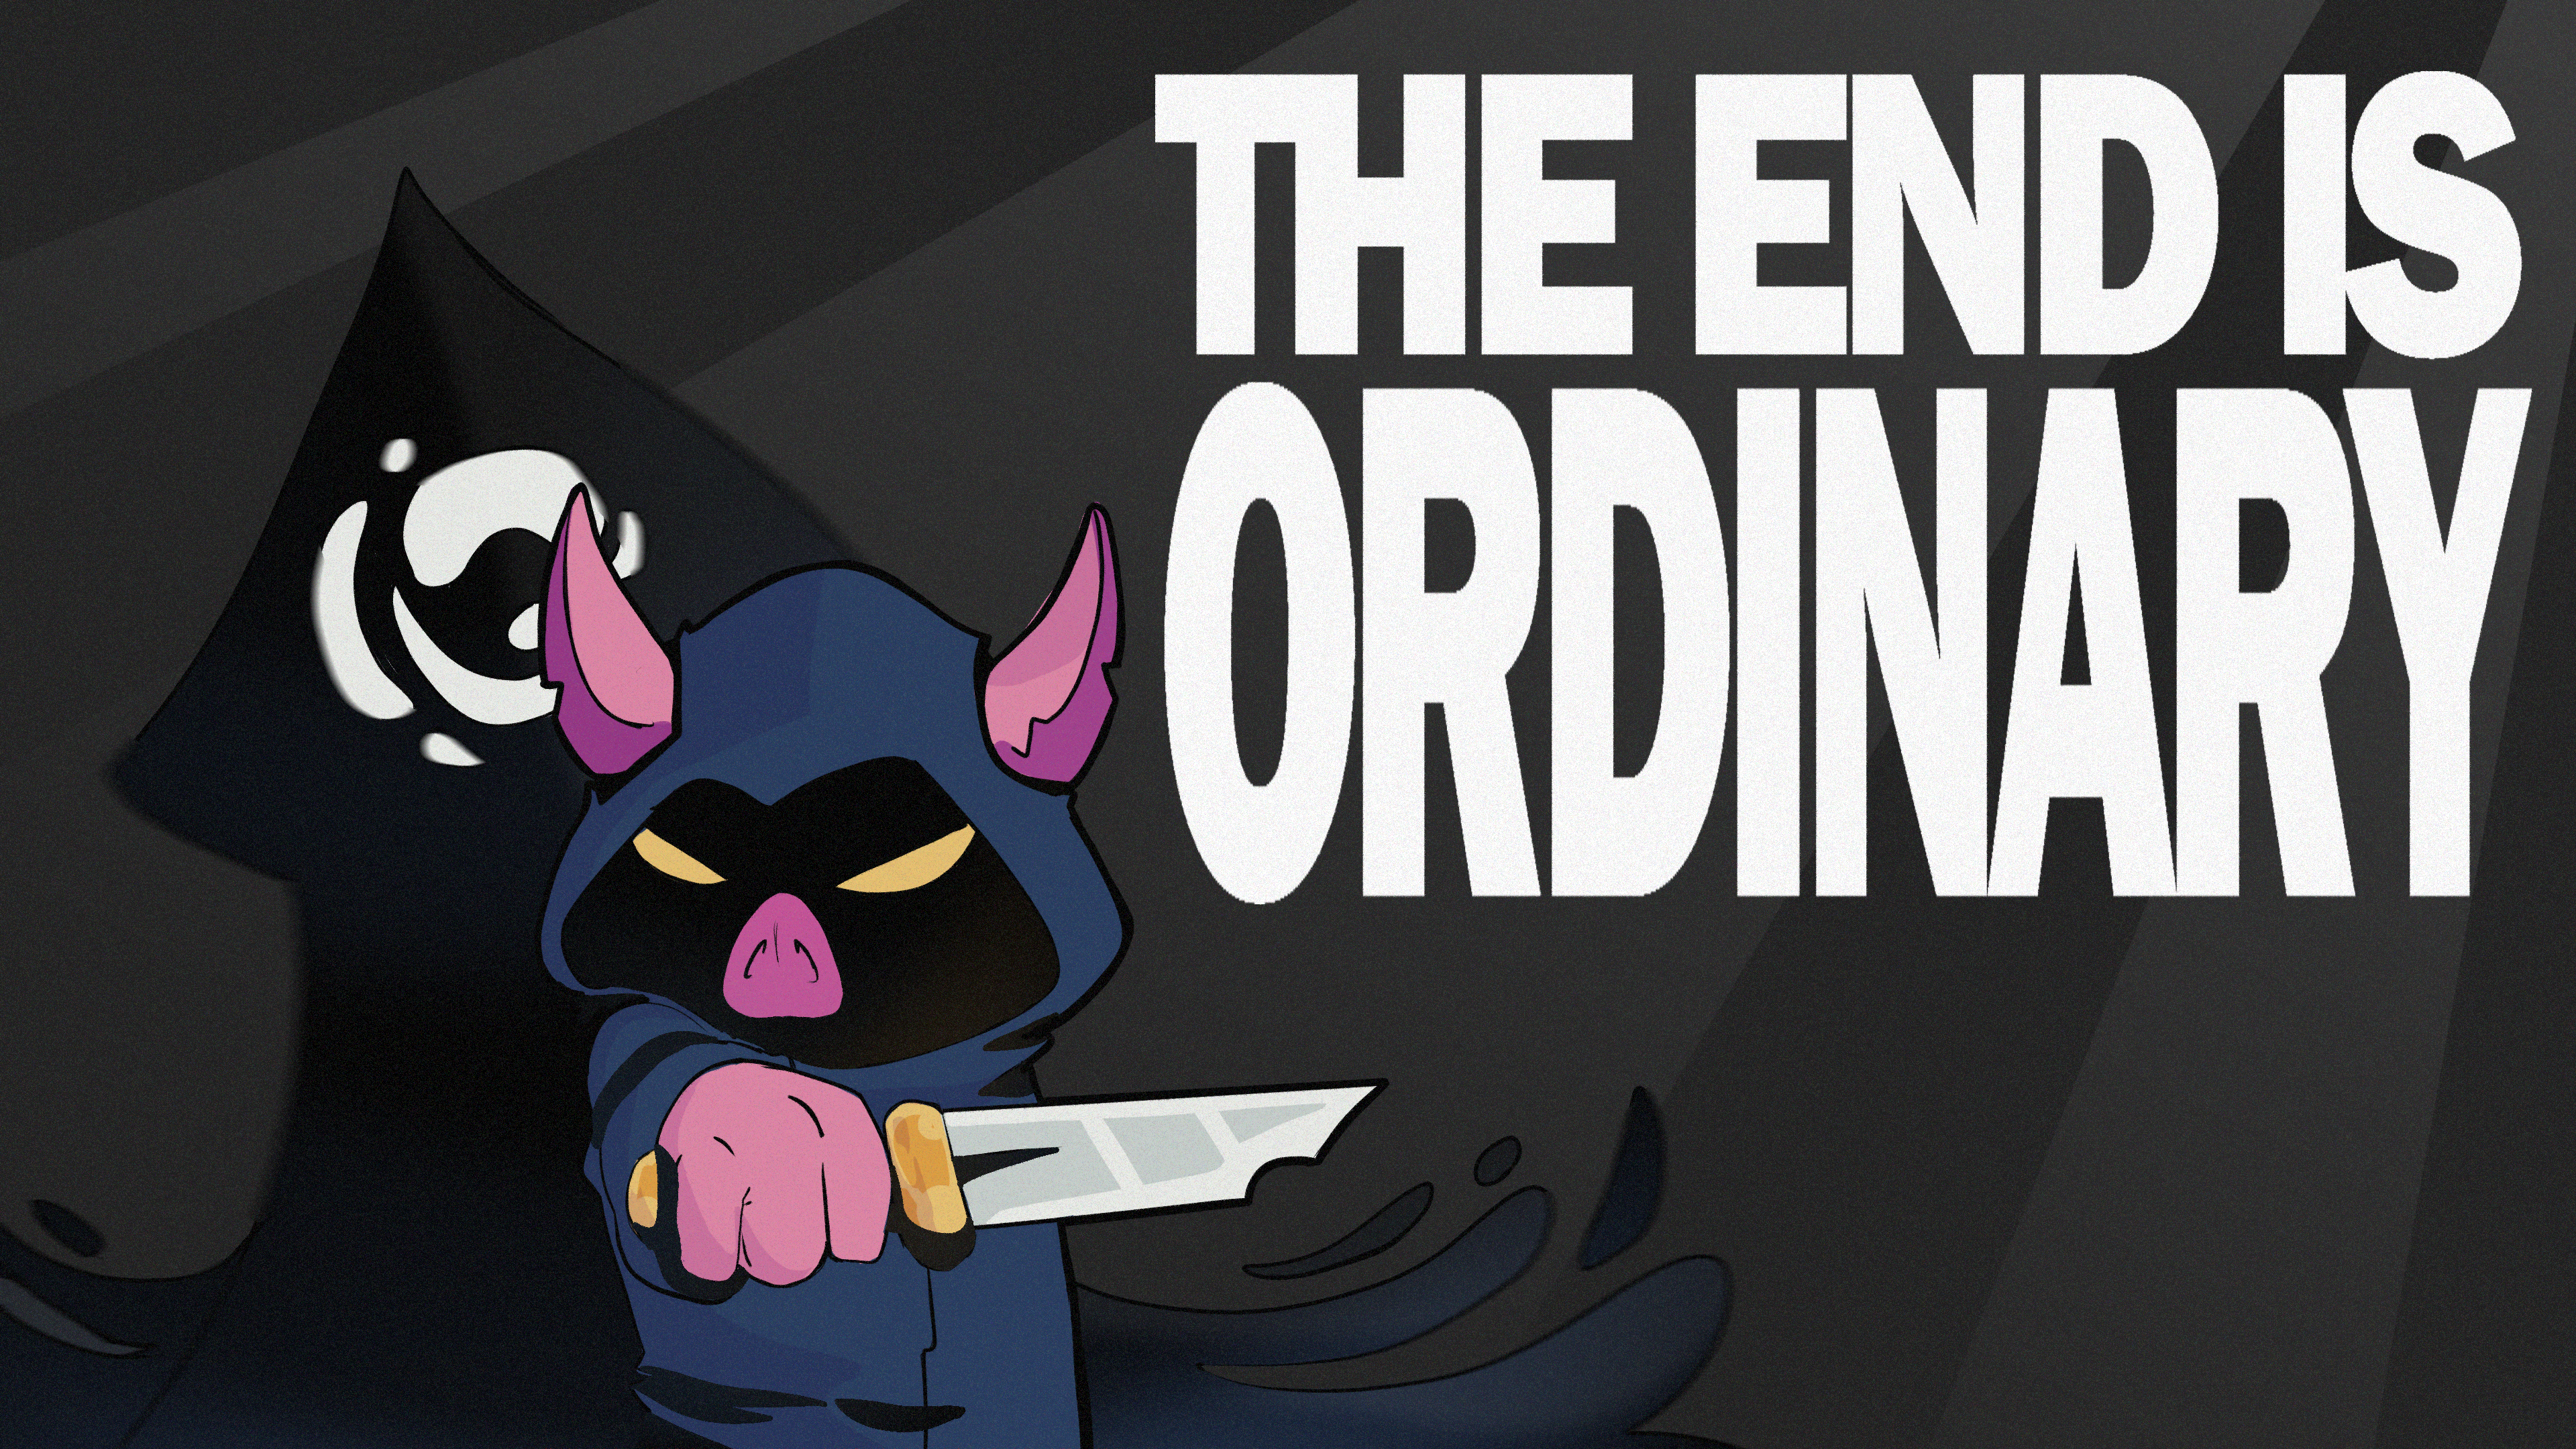 The End Is Ordinary.